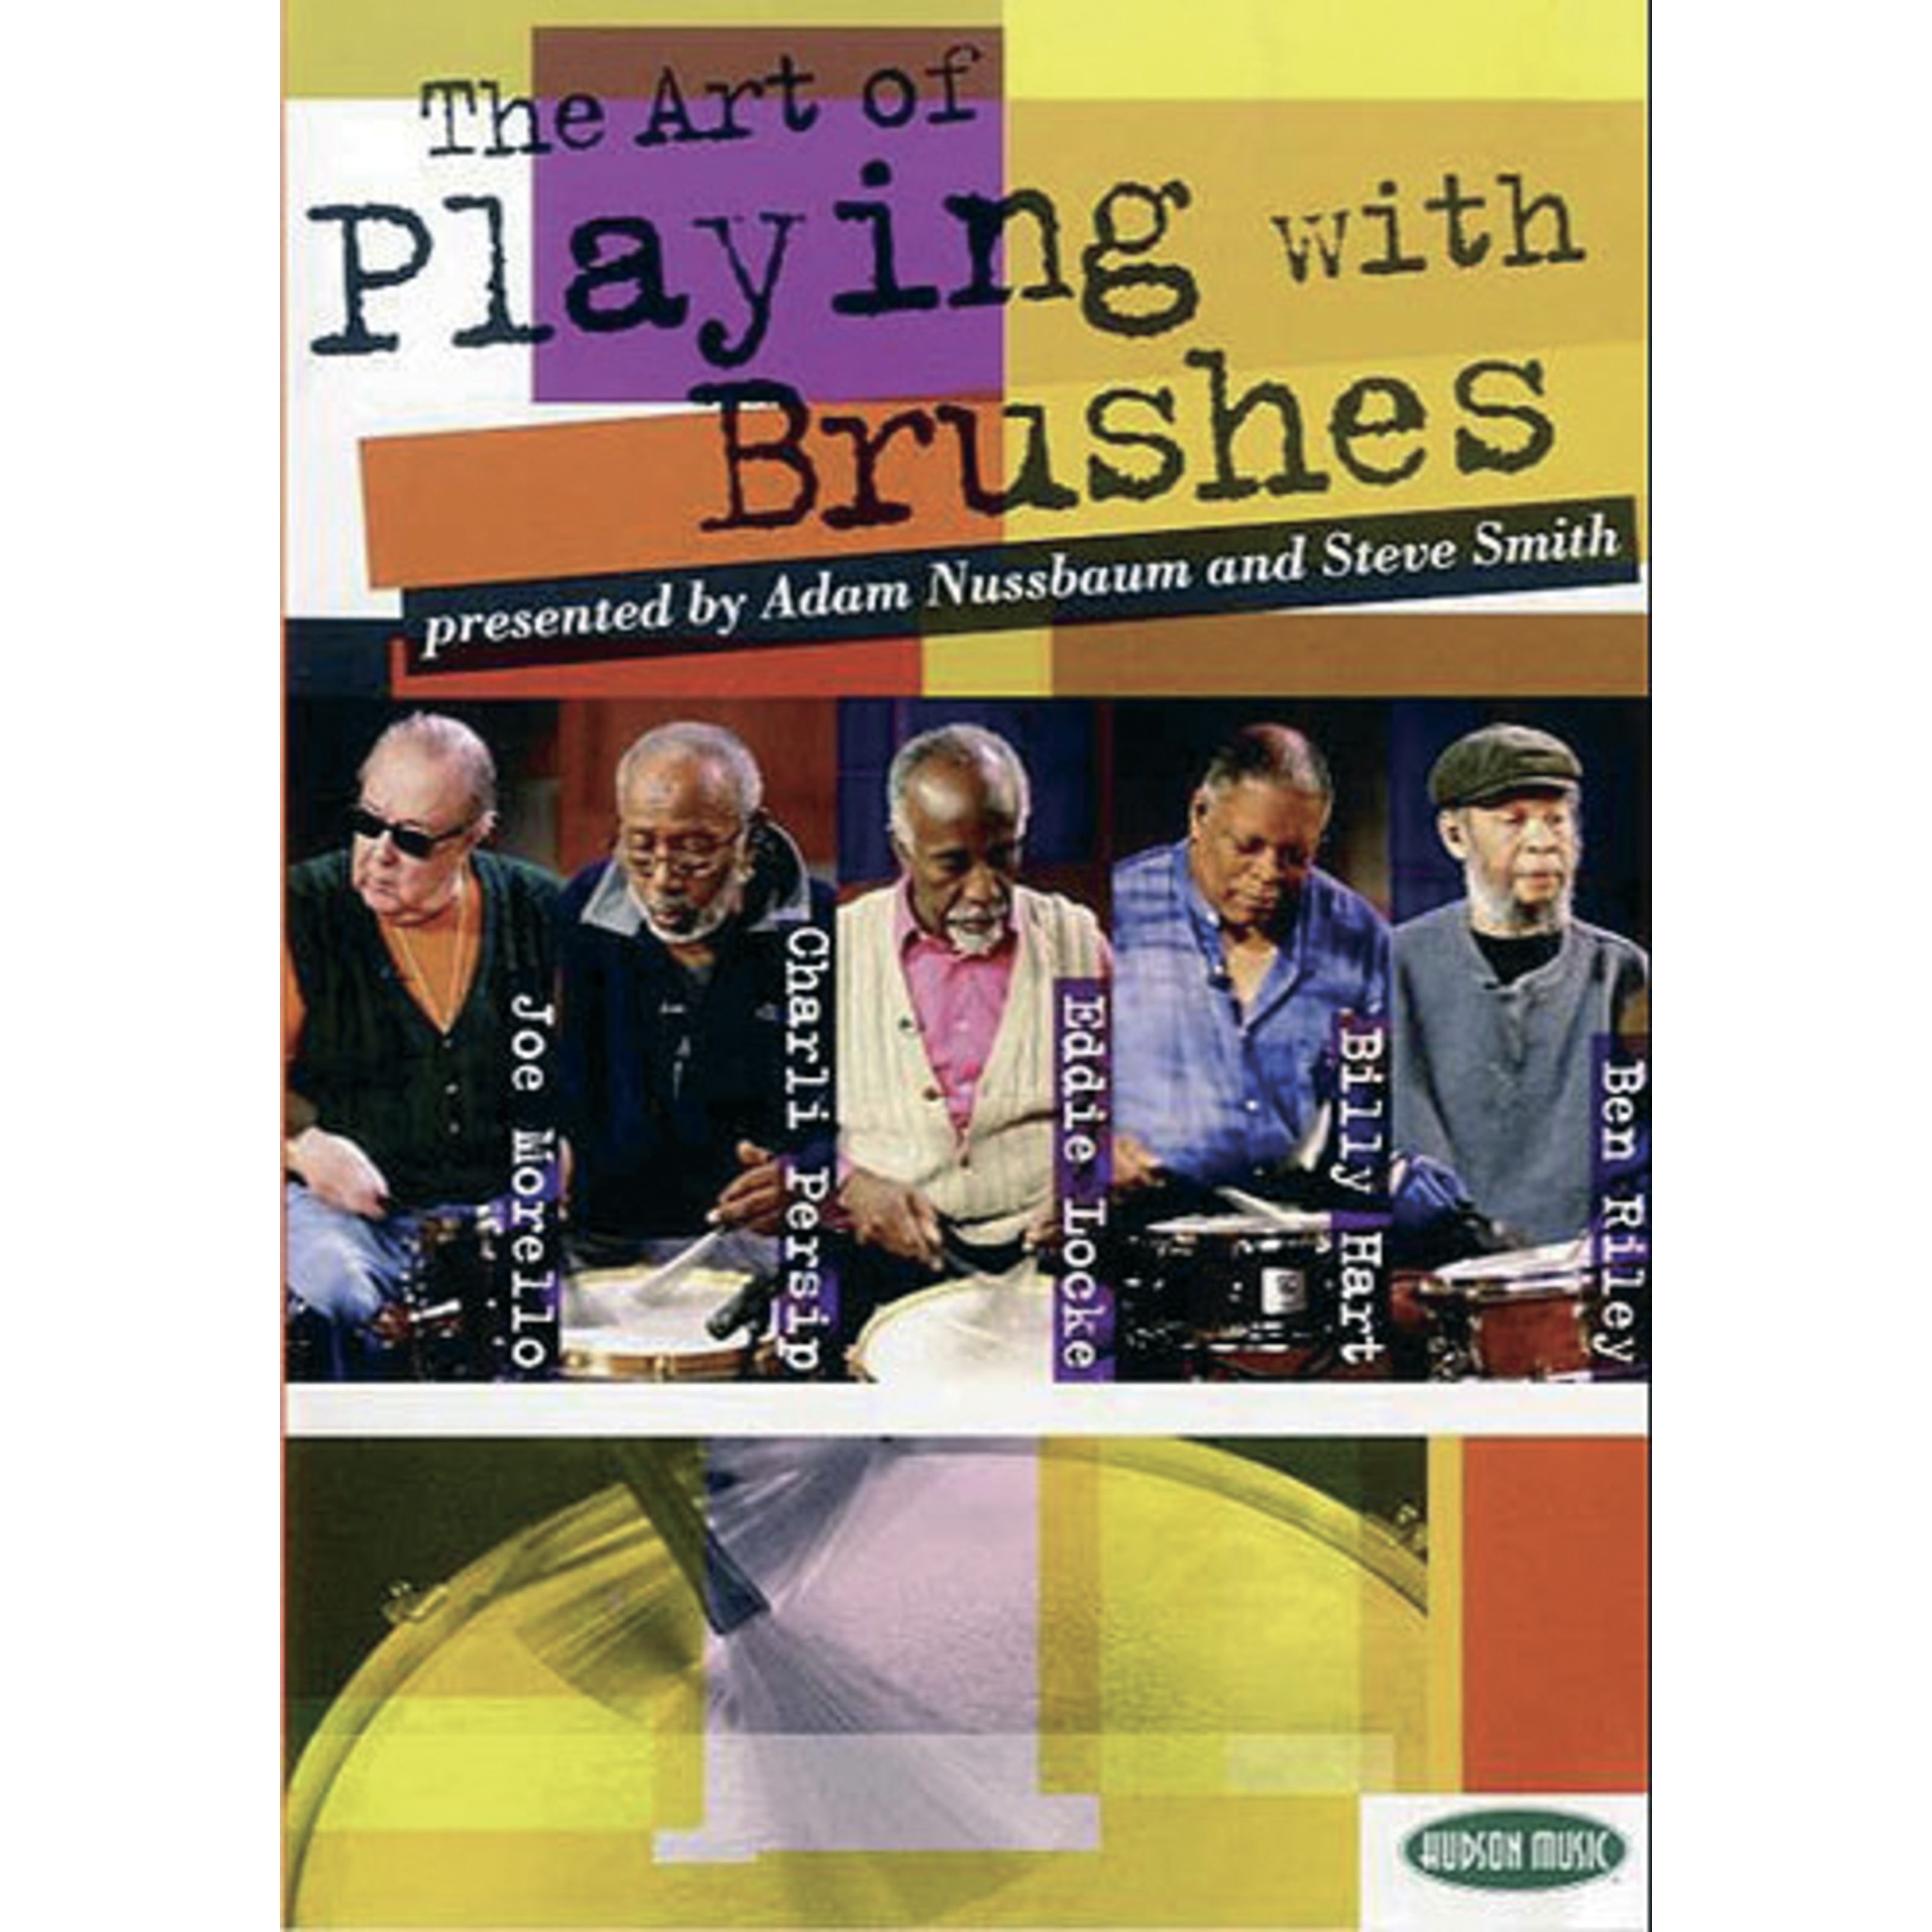 Hudson Music Art Of Playing With Brushes CD und 2 DVDs - DVD